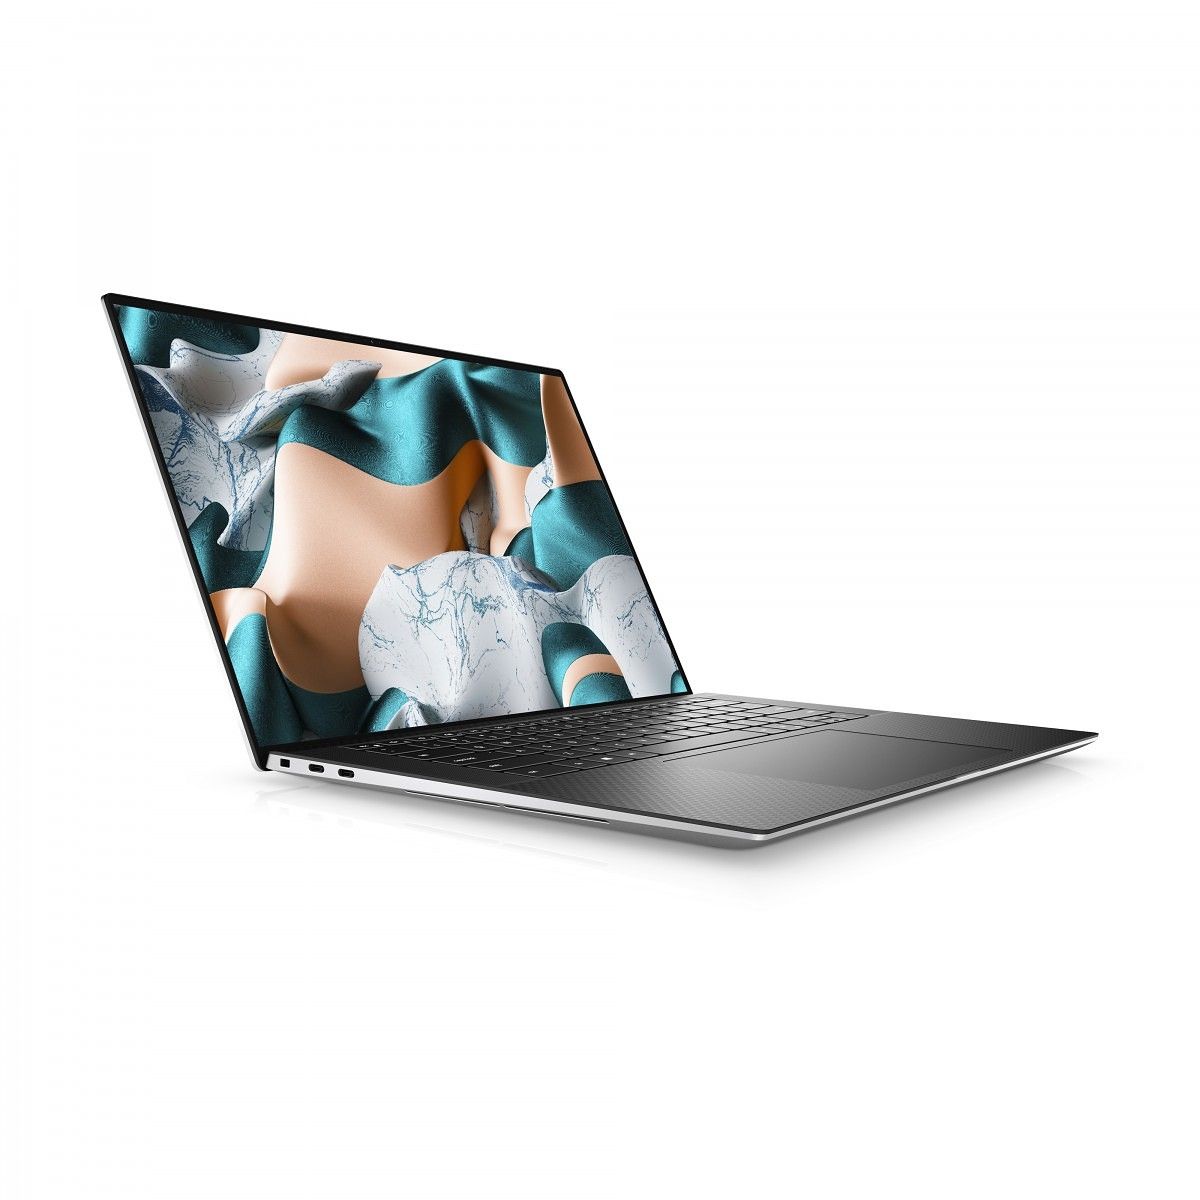 The Dell XPS 15 is a powerhouse of a laptop considering its size. Featuring 11th-generation Intel Core H-series CPUs and up to an Nvidia GeForce RTX 3050 Ti, it can handle almost anything you throw at it.